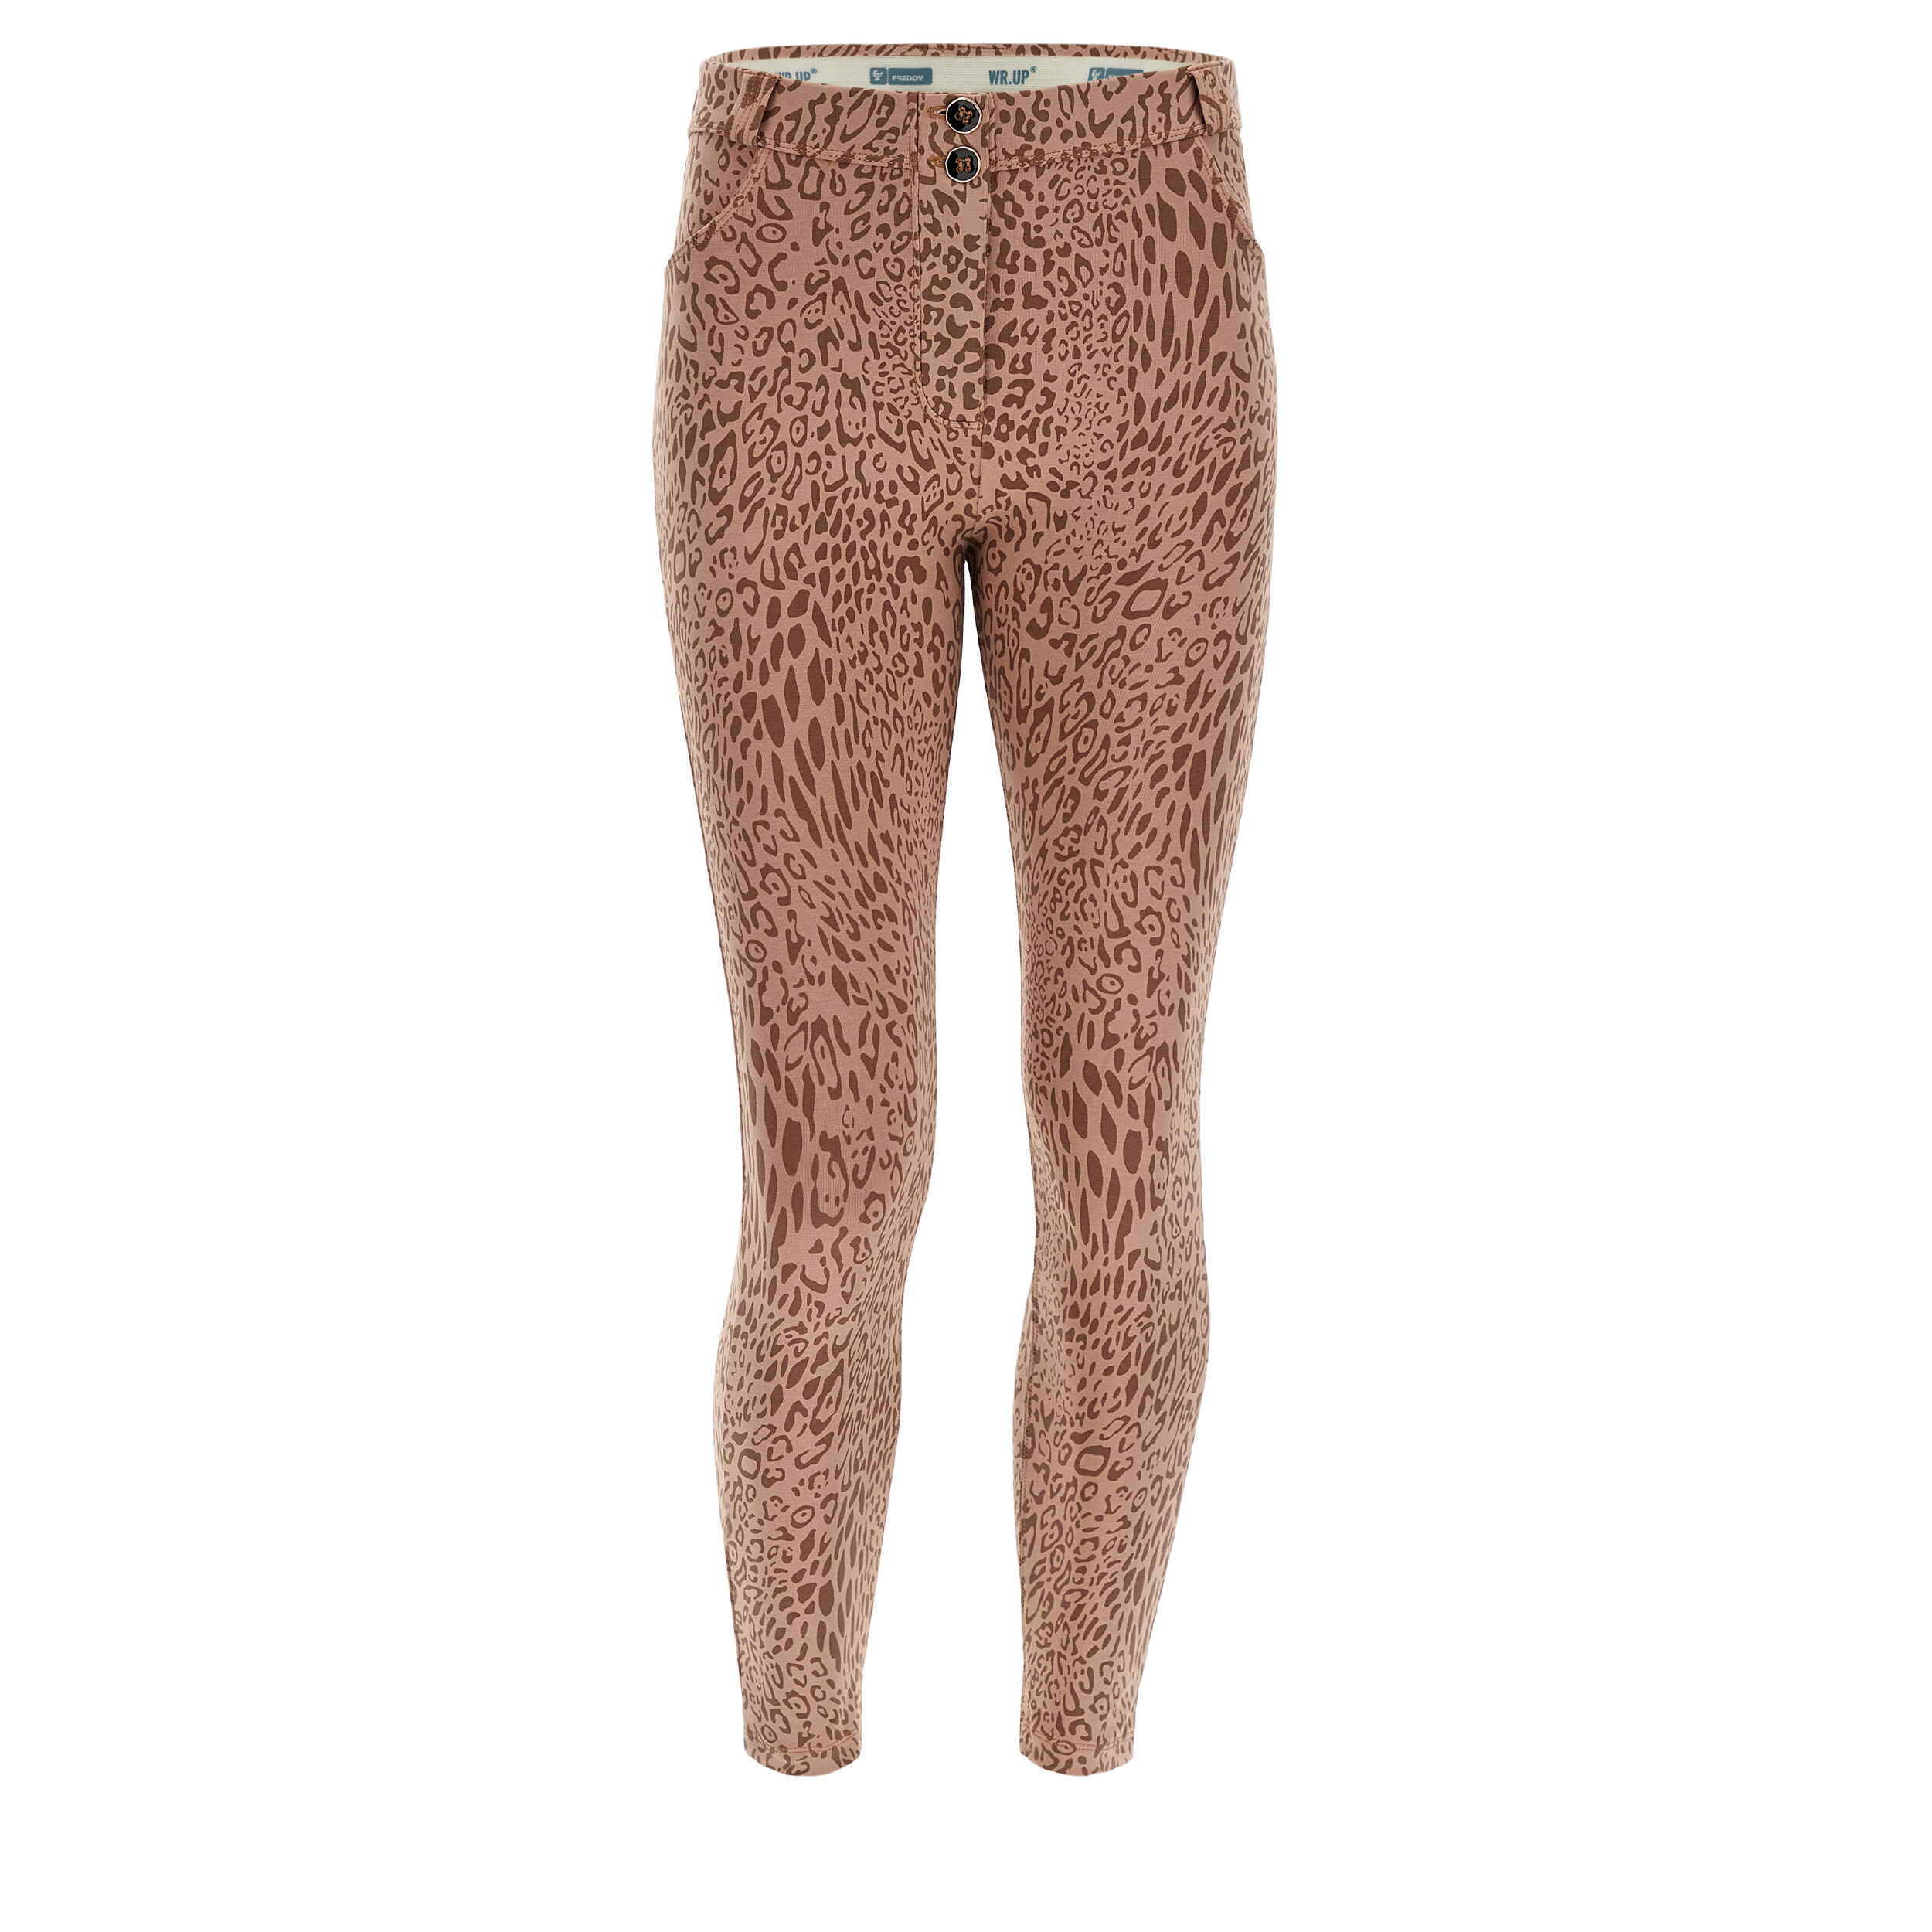 Freddy Pantaloni WR.UP® vita alta in cotone stampato animalier Animalier Allover Pink Dyed Donna Large